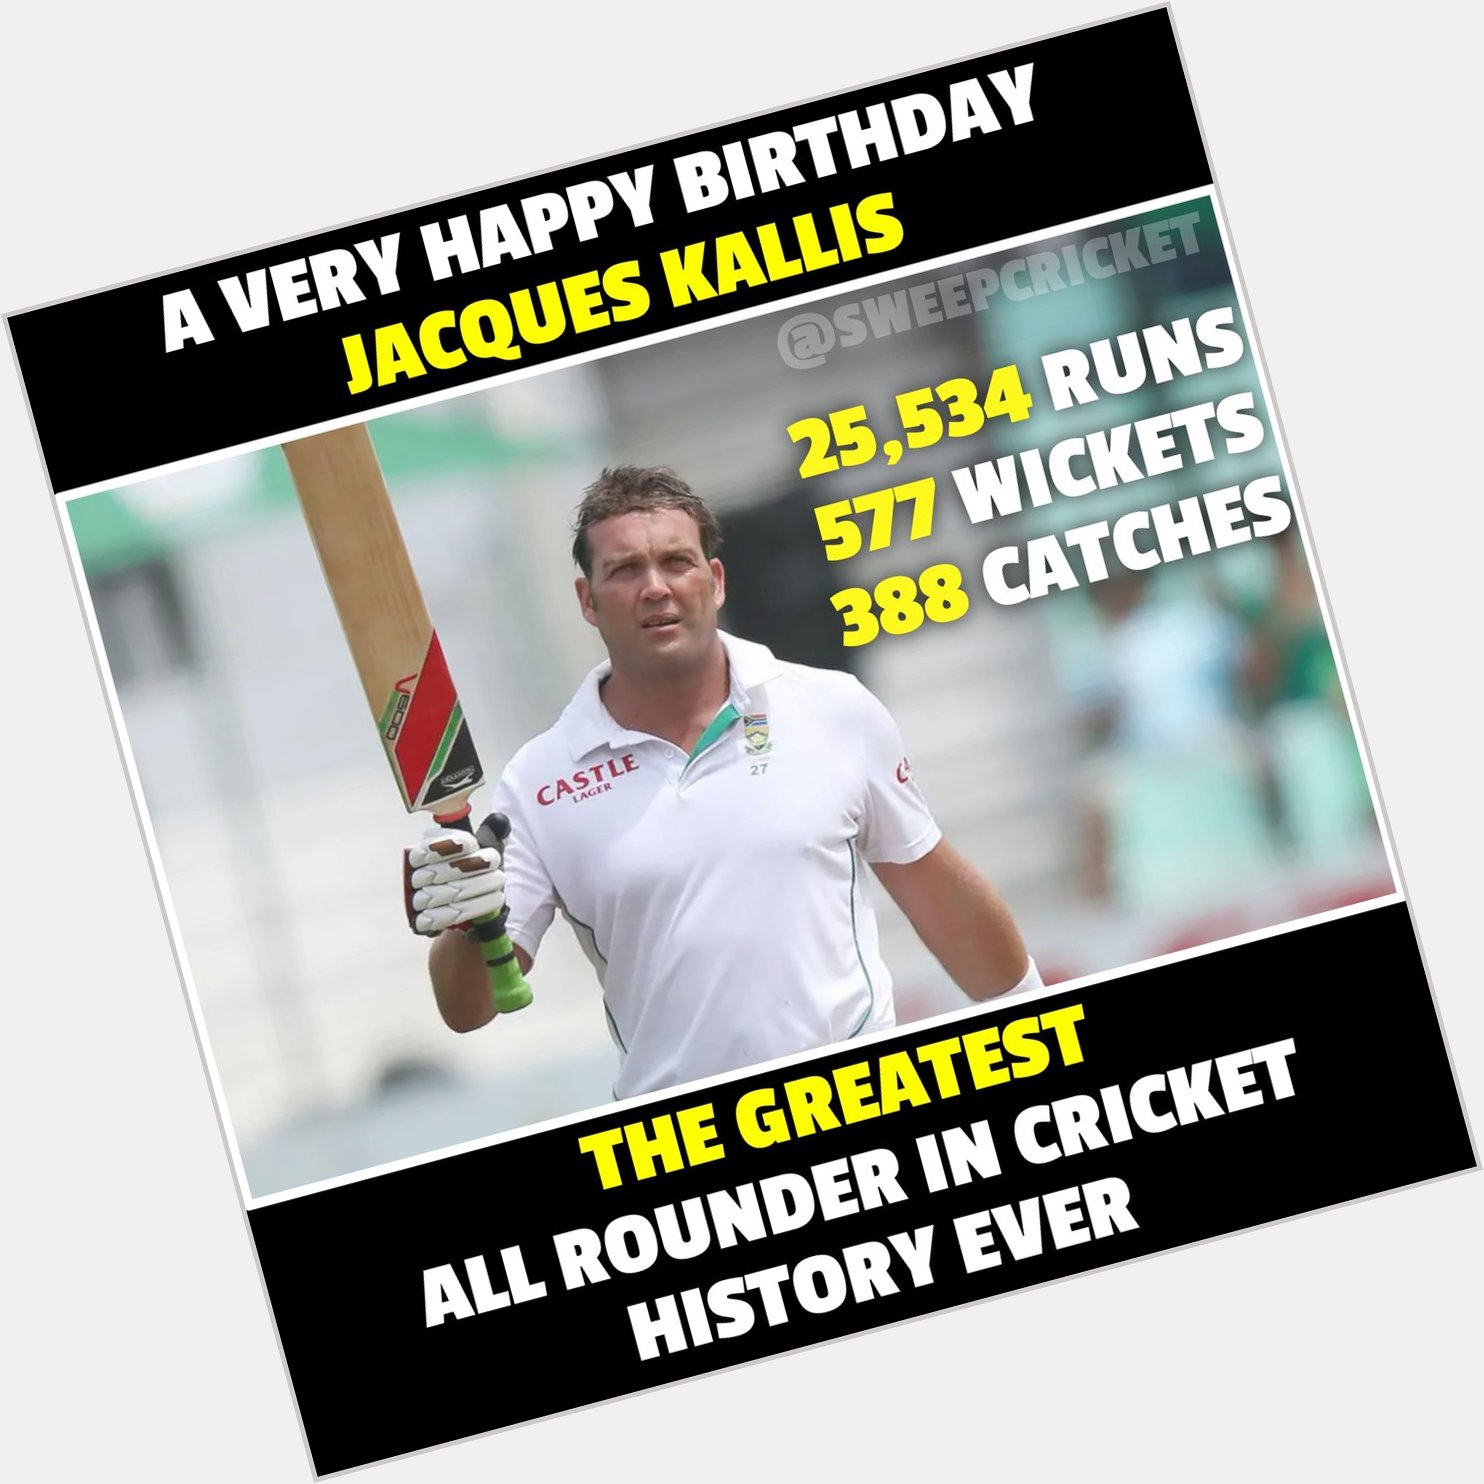 His international cricket stats justify his greatness! A very Happy Birthday Jacques Kallis 